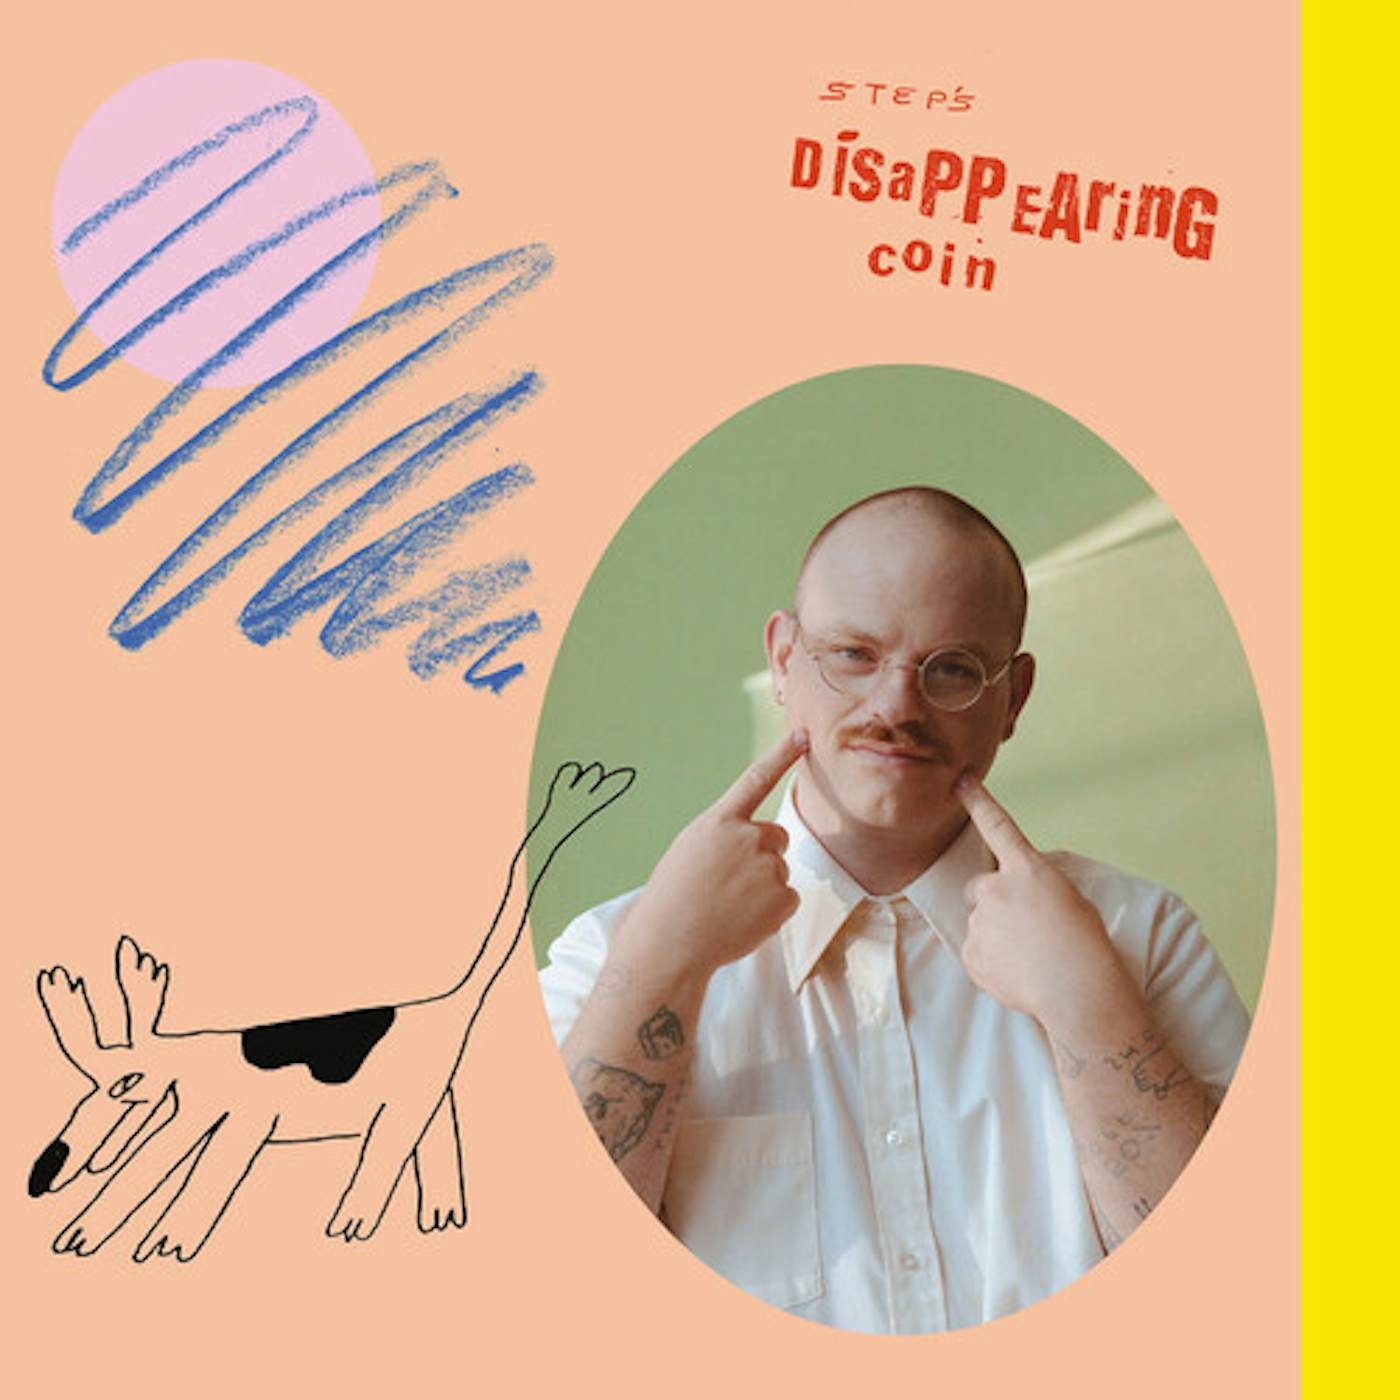 Stephen Steinbrink DISAPPEARING COIN Vinyl Record